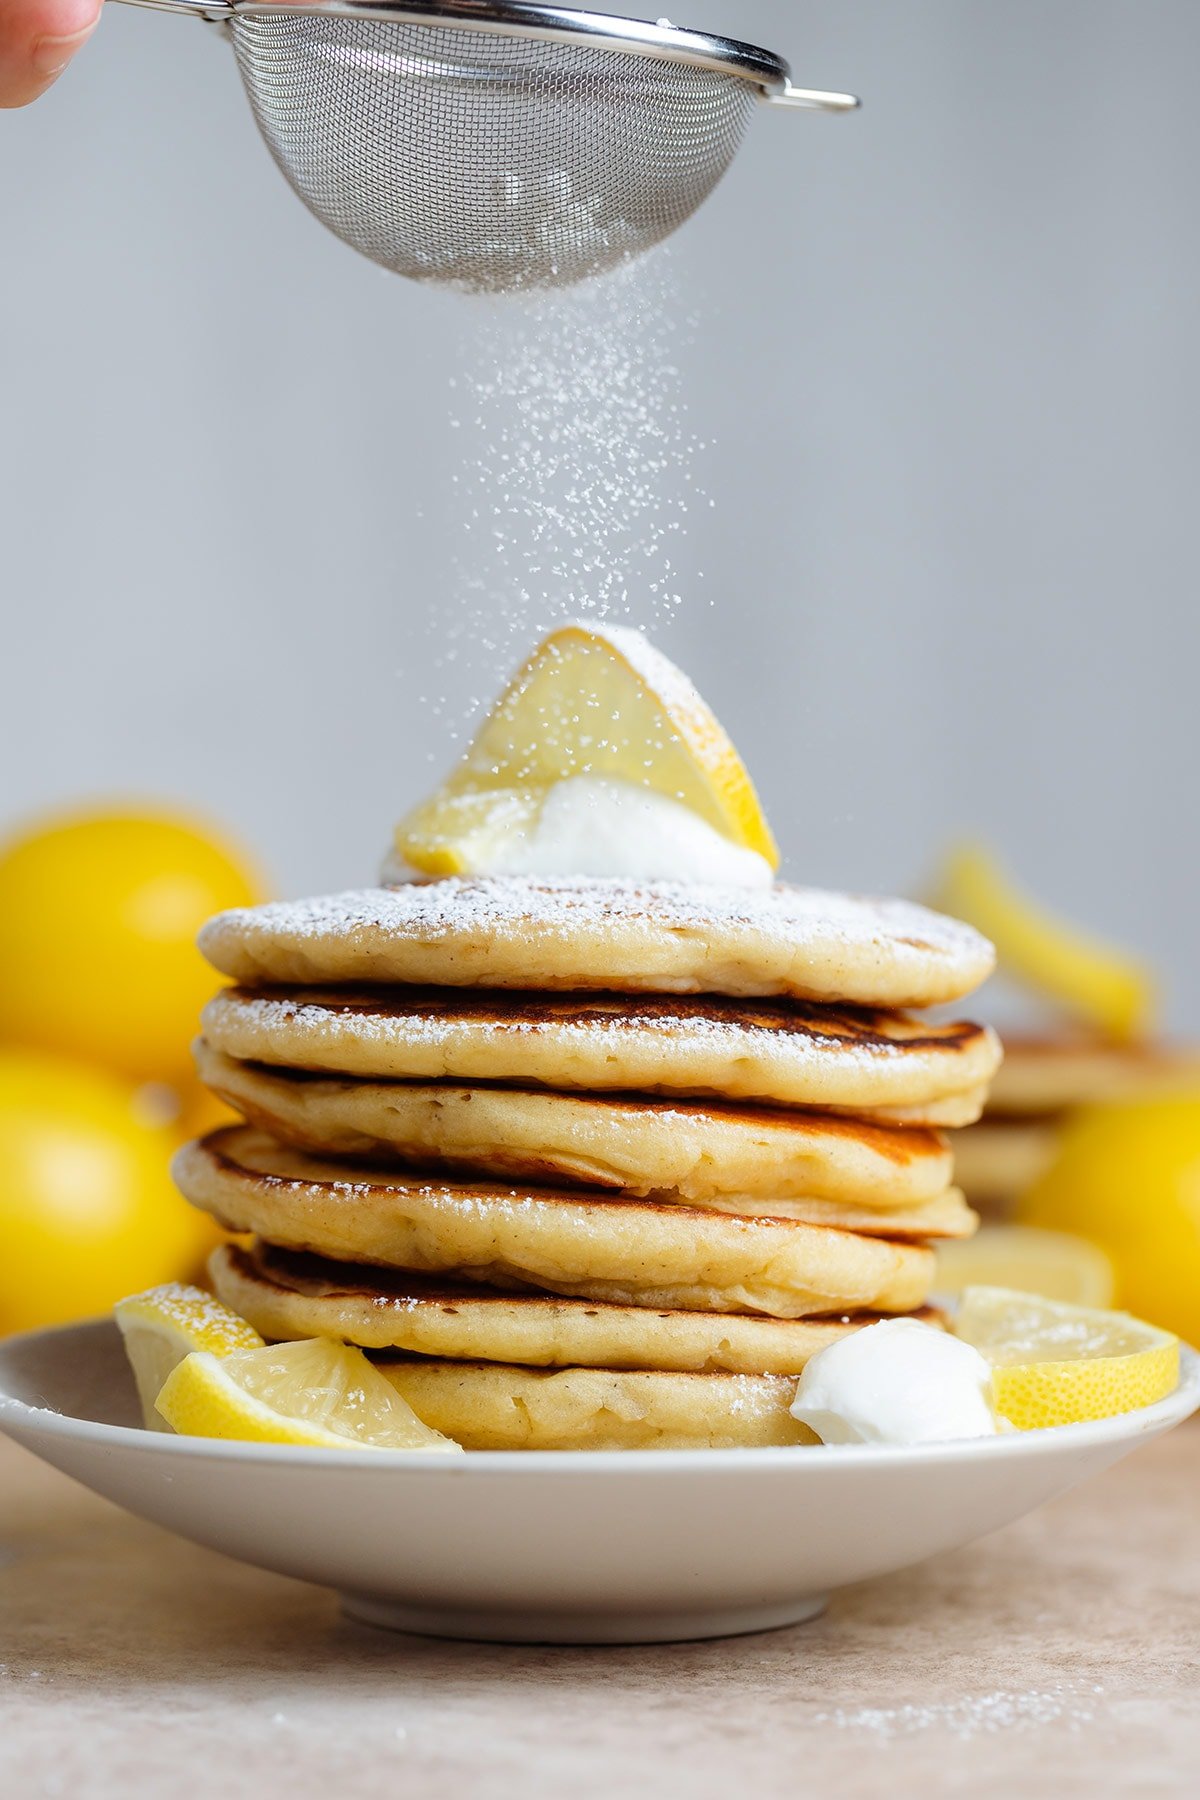 A stack of pancakes with lemon slice on top and a dollop of yogurt being dusted with powdered sugar.